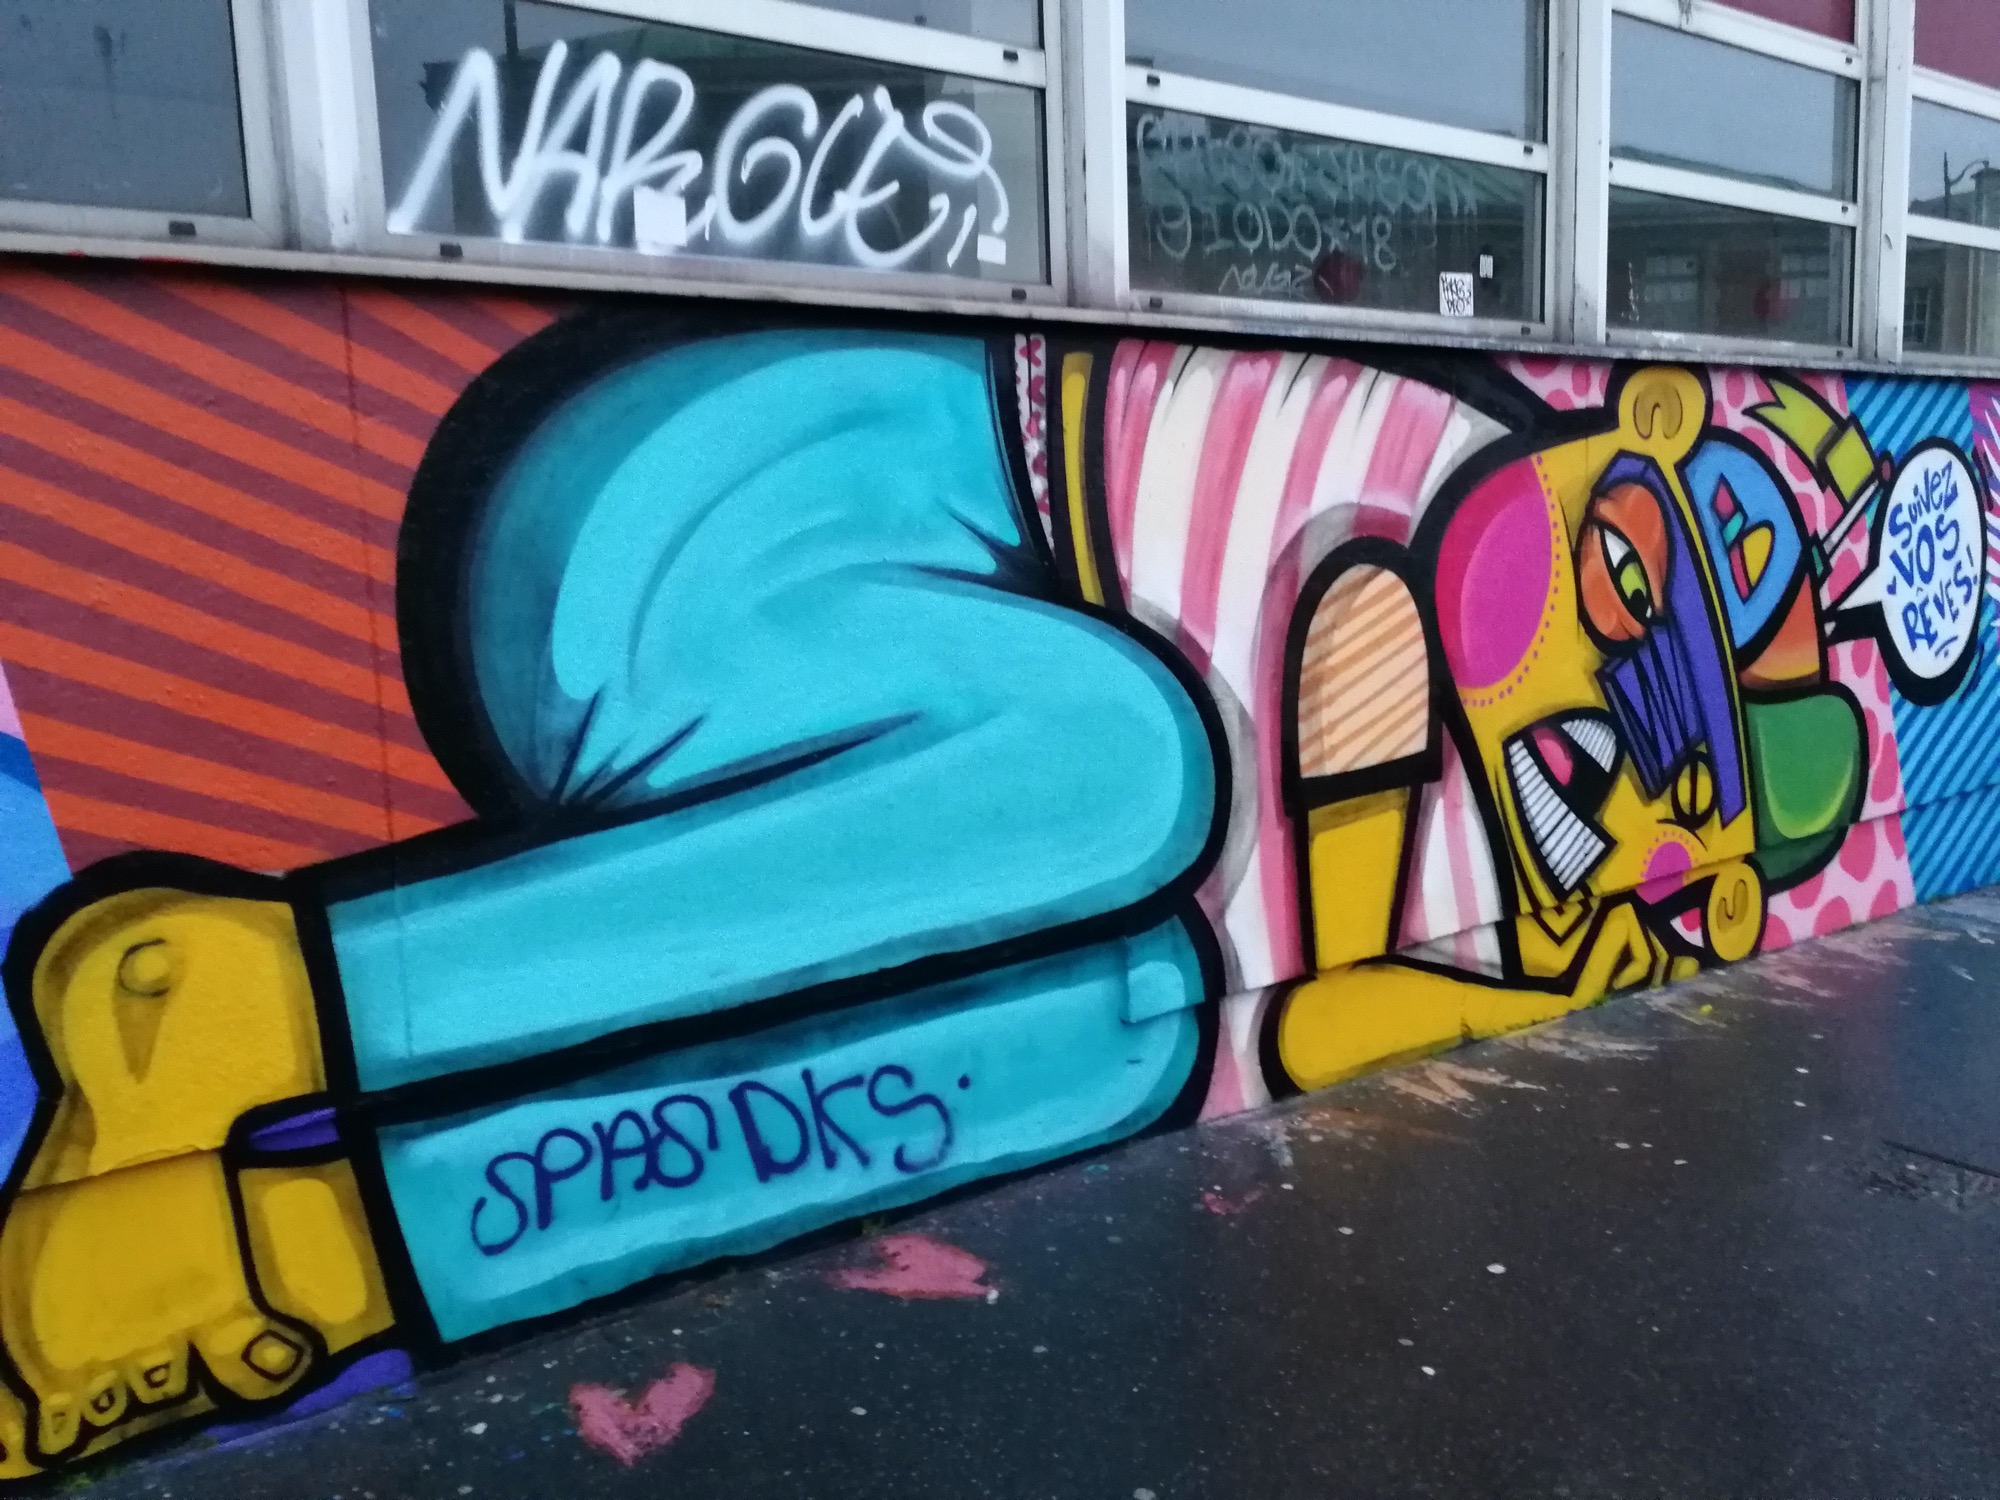 Graffiti 672  by the artist Toys Daniel captured by Rabot in Paris France